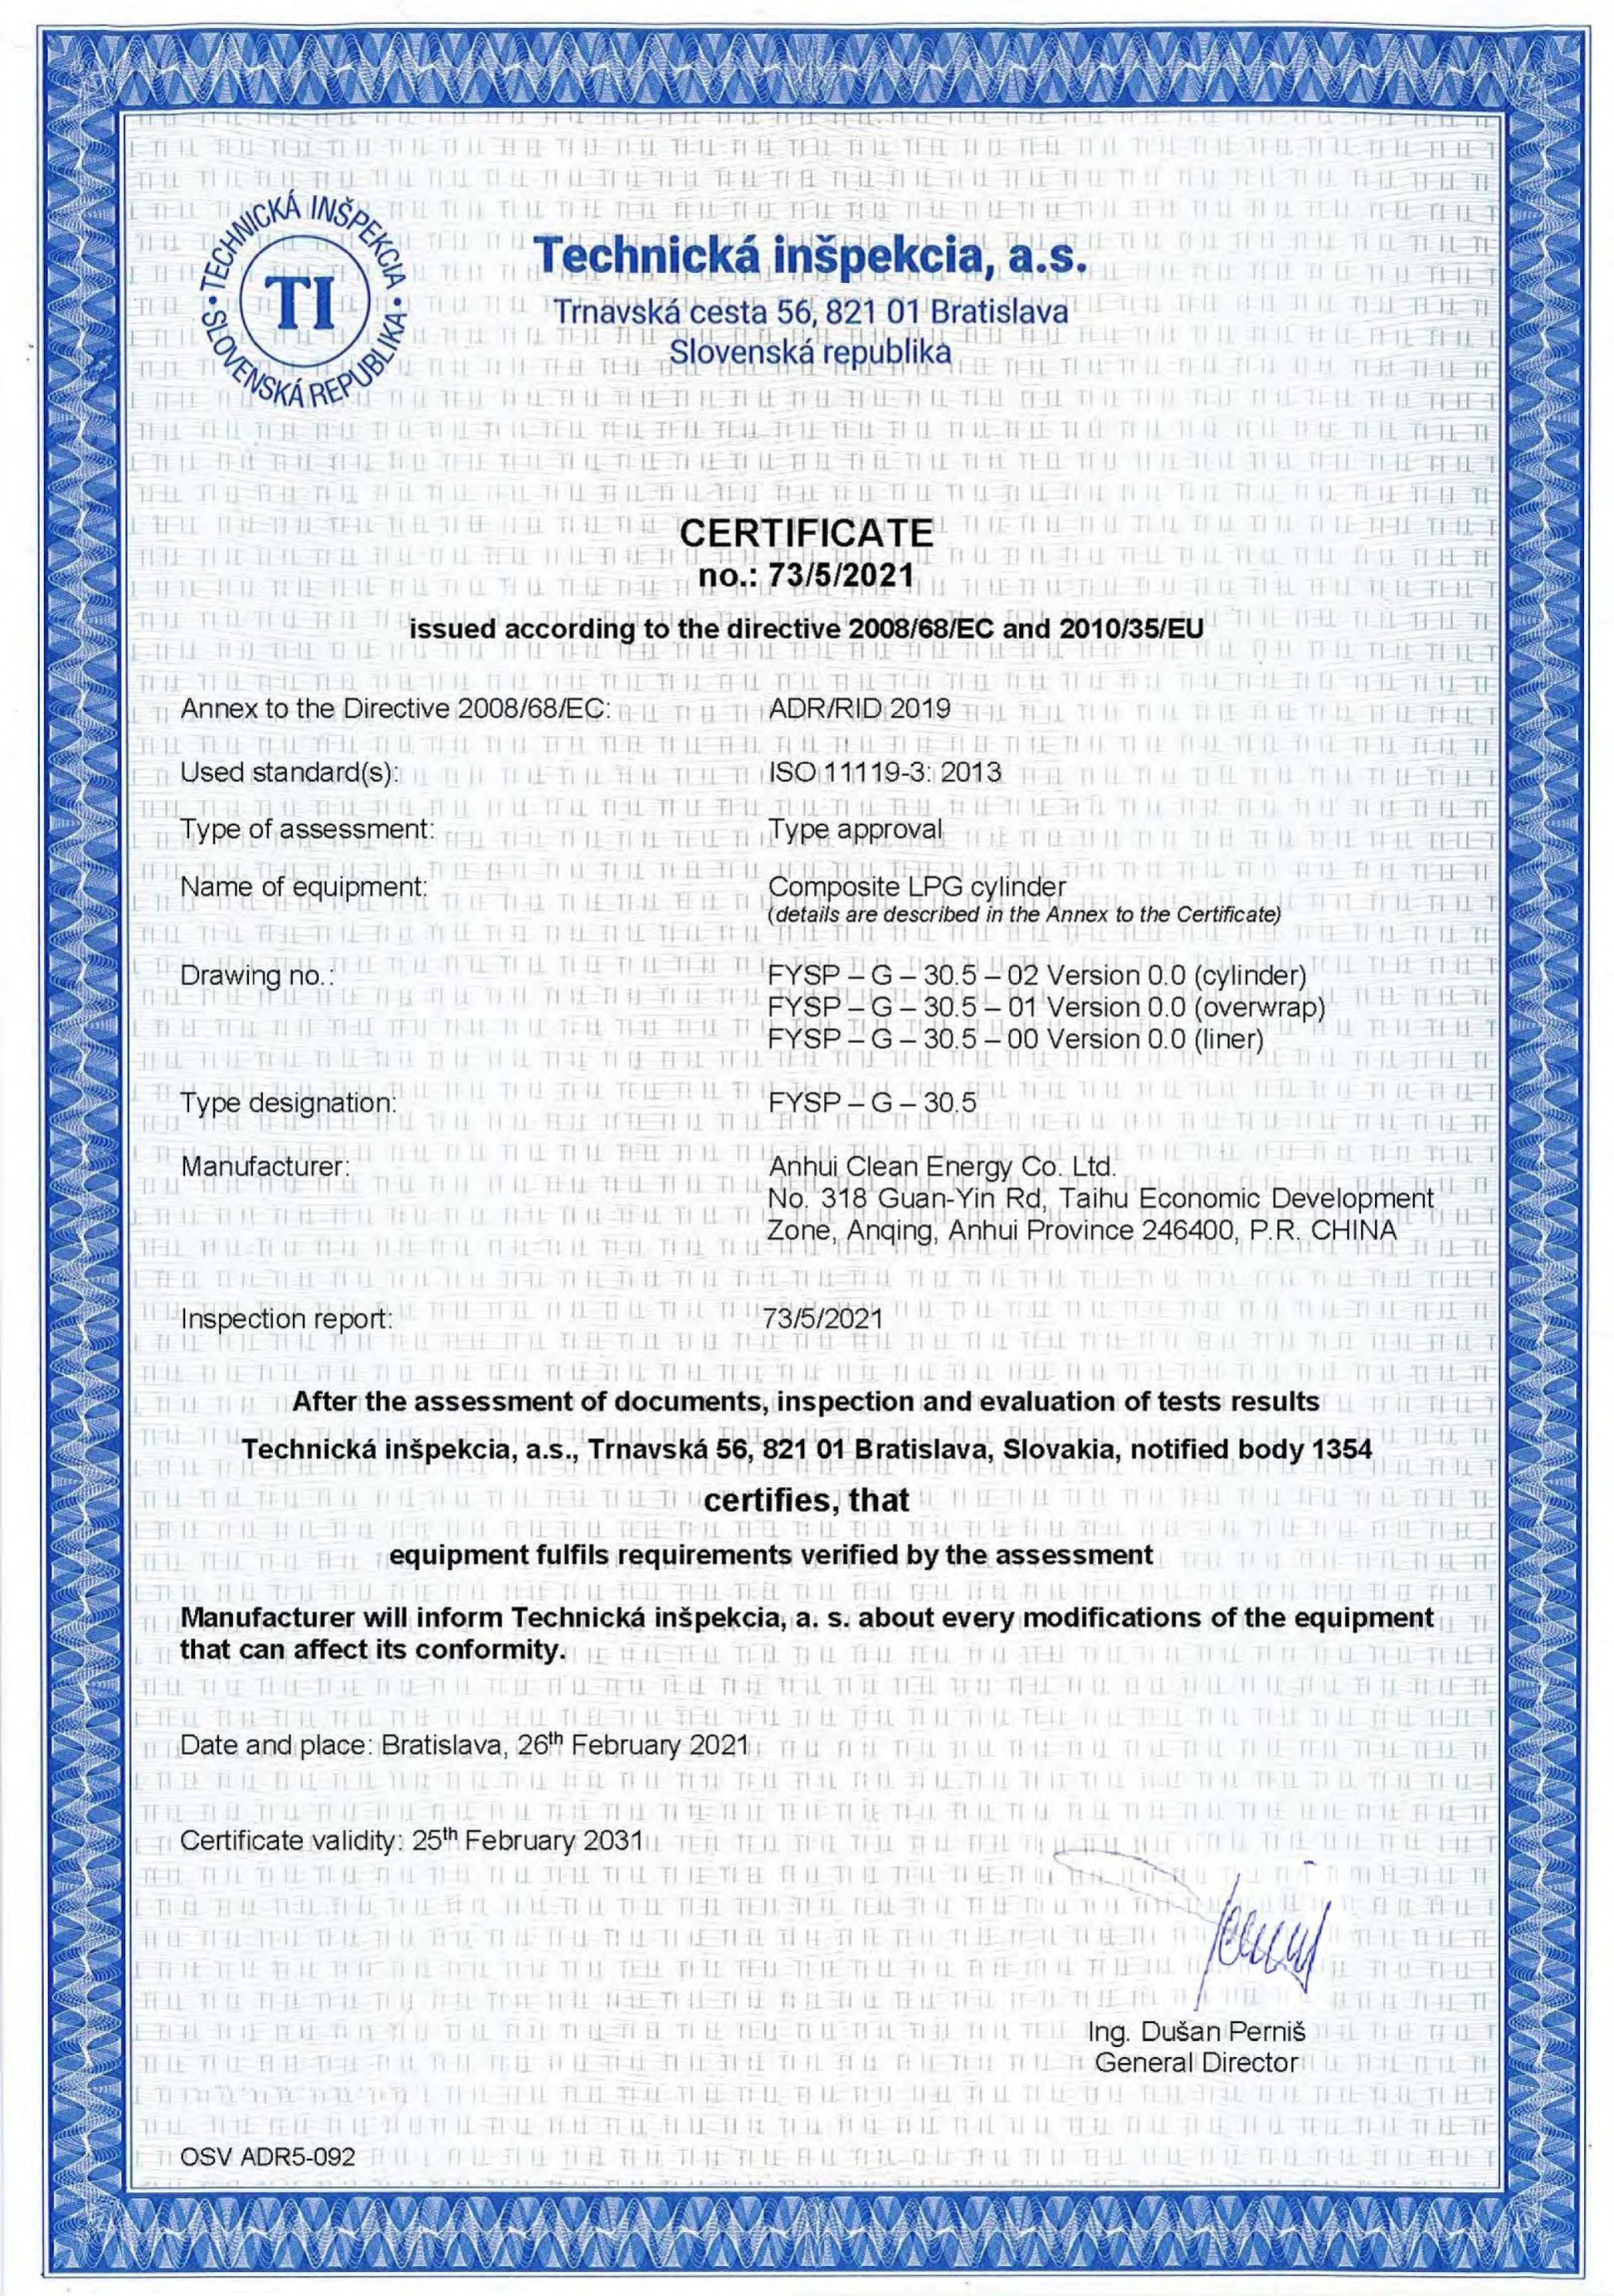 Congratulations to Clean Energy's LPG Composite Gas Cylinder for Successfully Obtaining the International Certificate